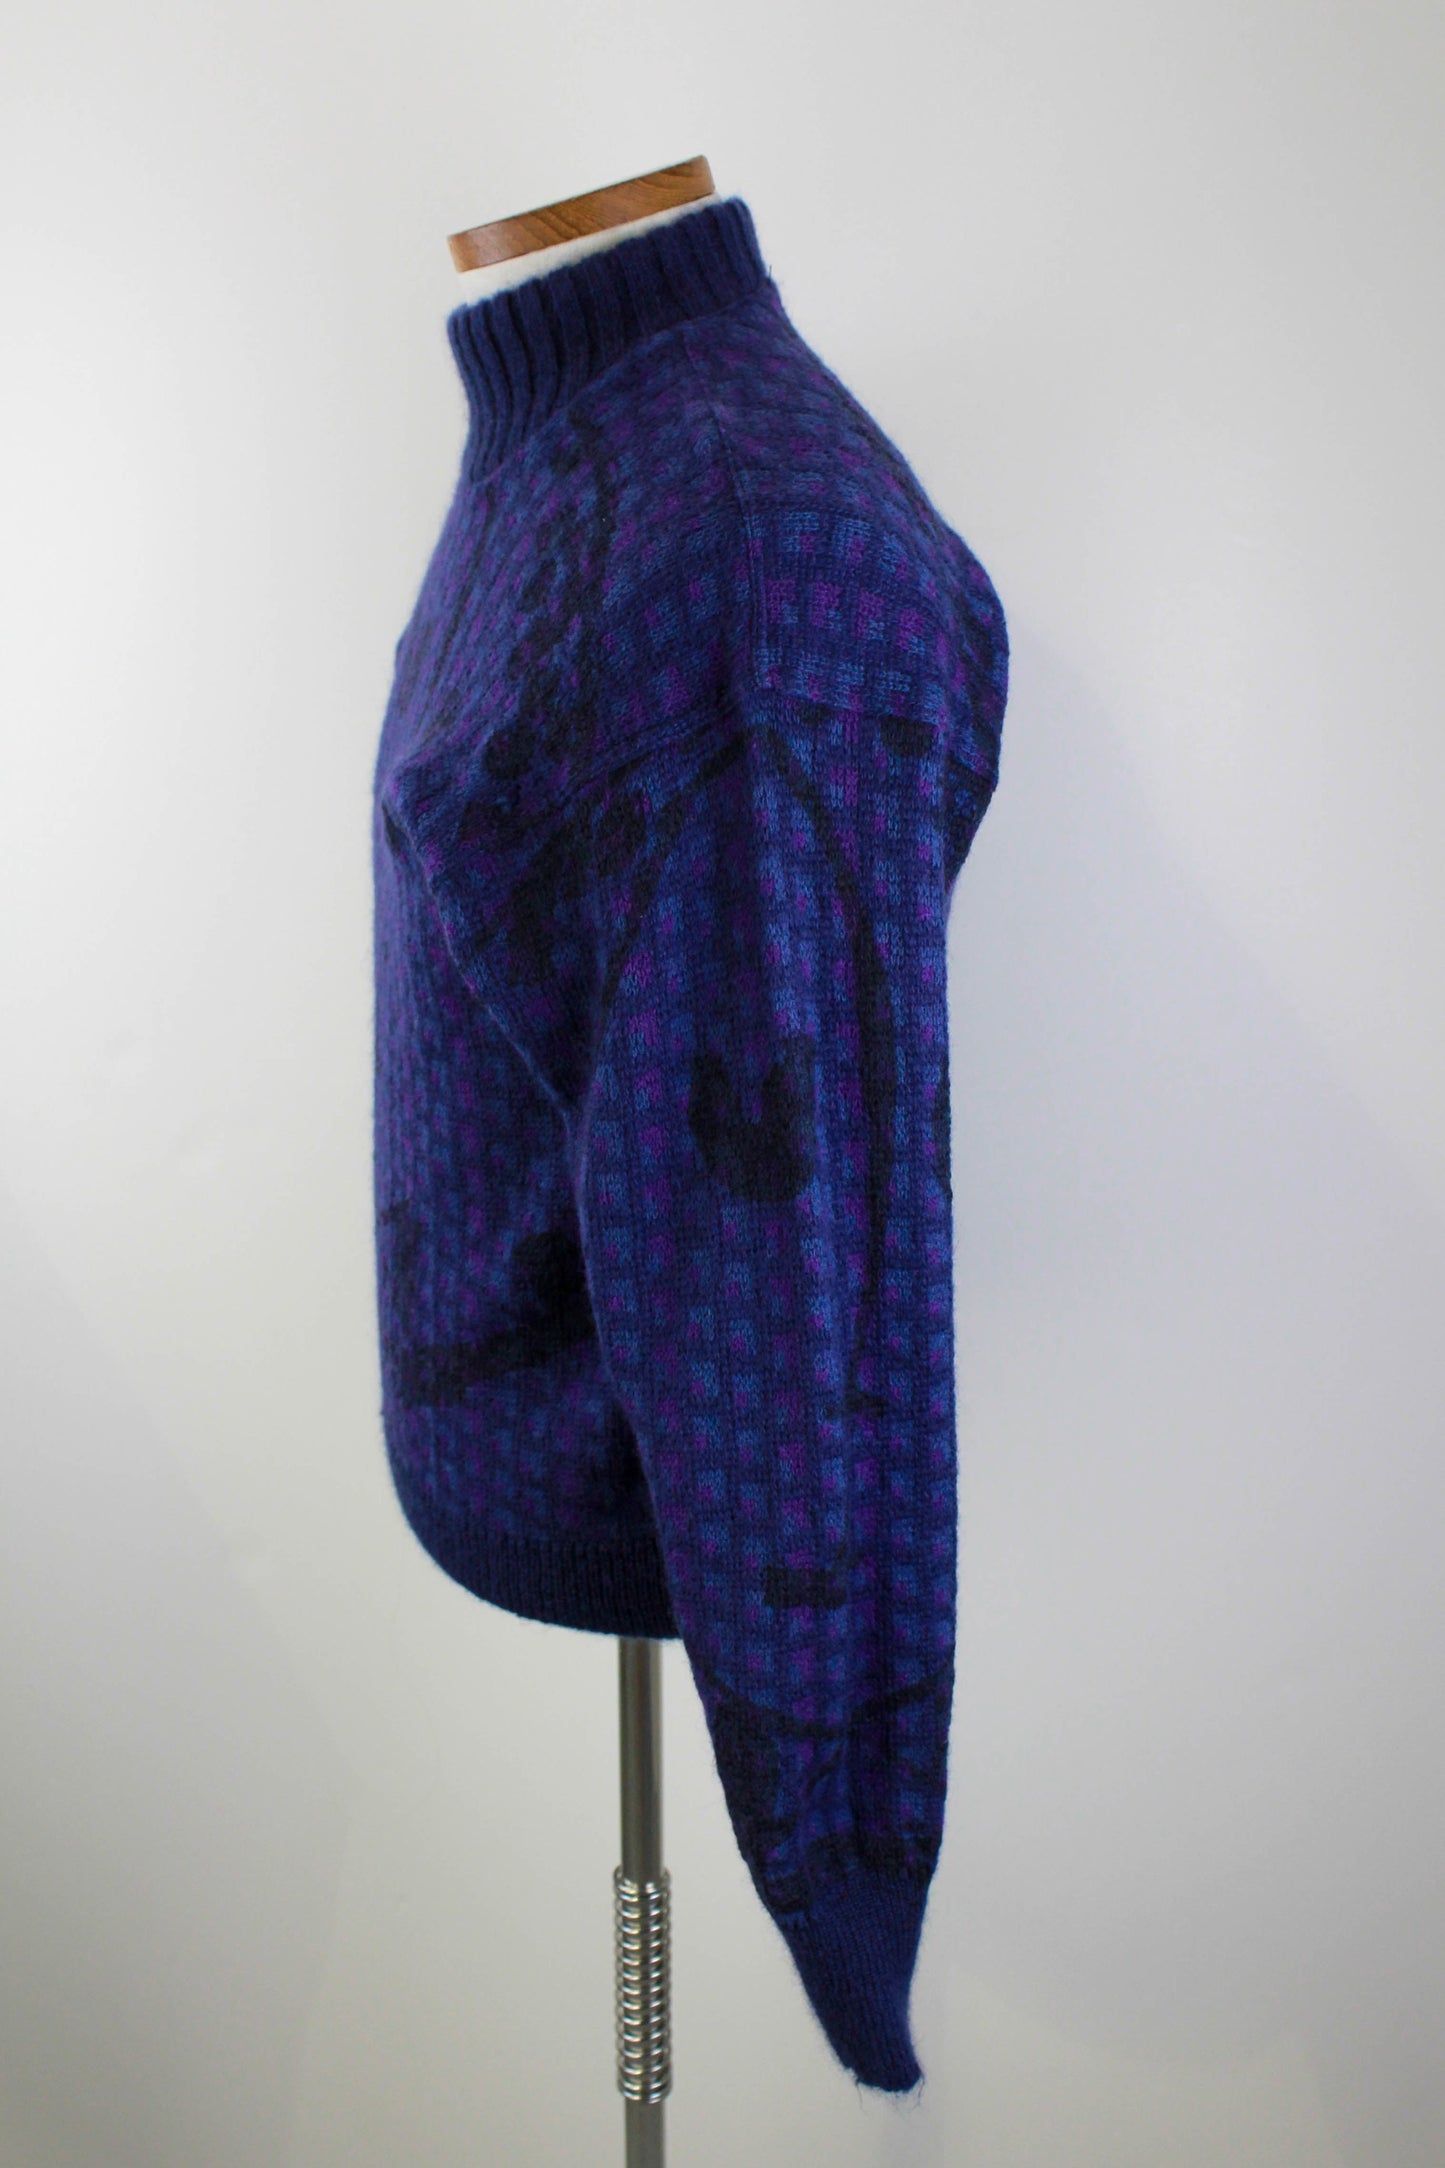 80s 90s Tino Cosmo Sweater with Abstract Face Knit design, Purple and Blue, Turtleneck Vintage Wool Sweater